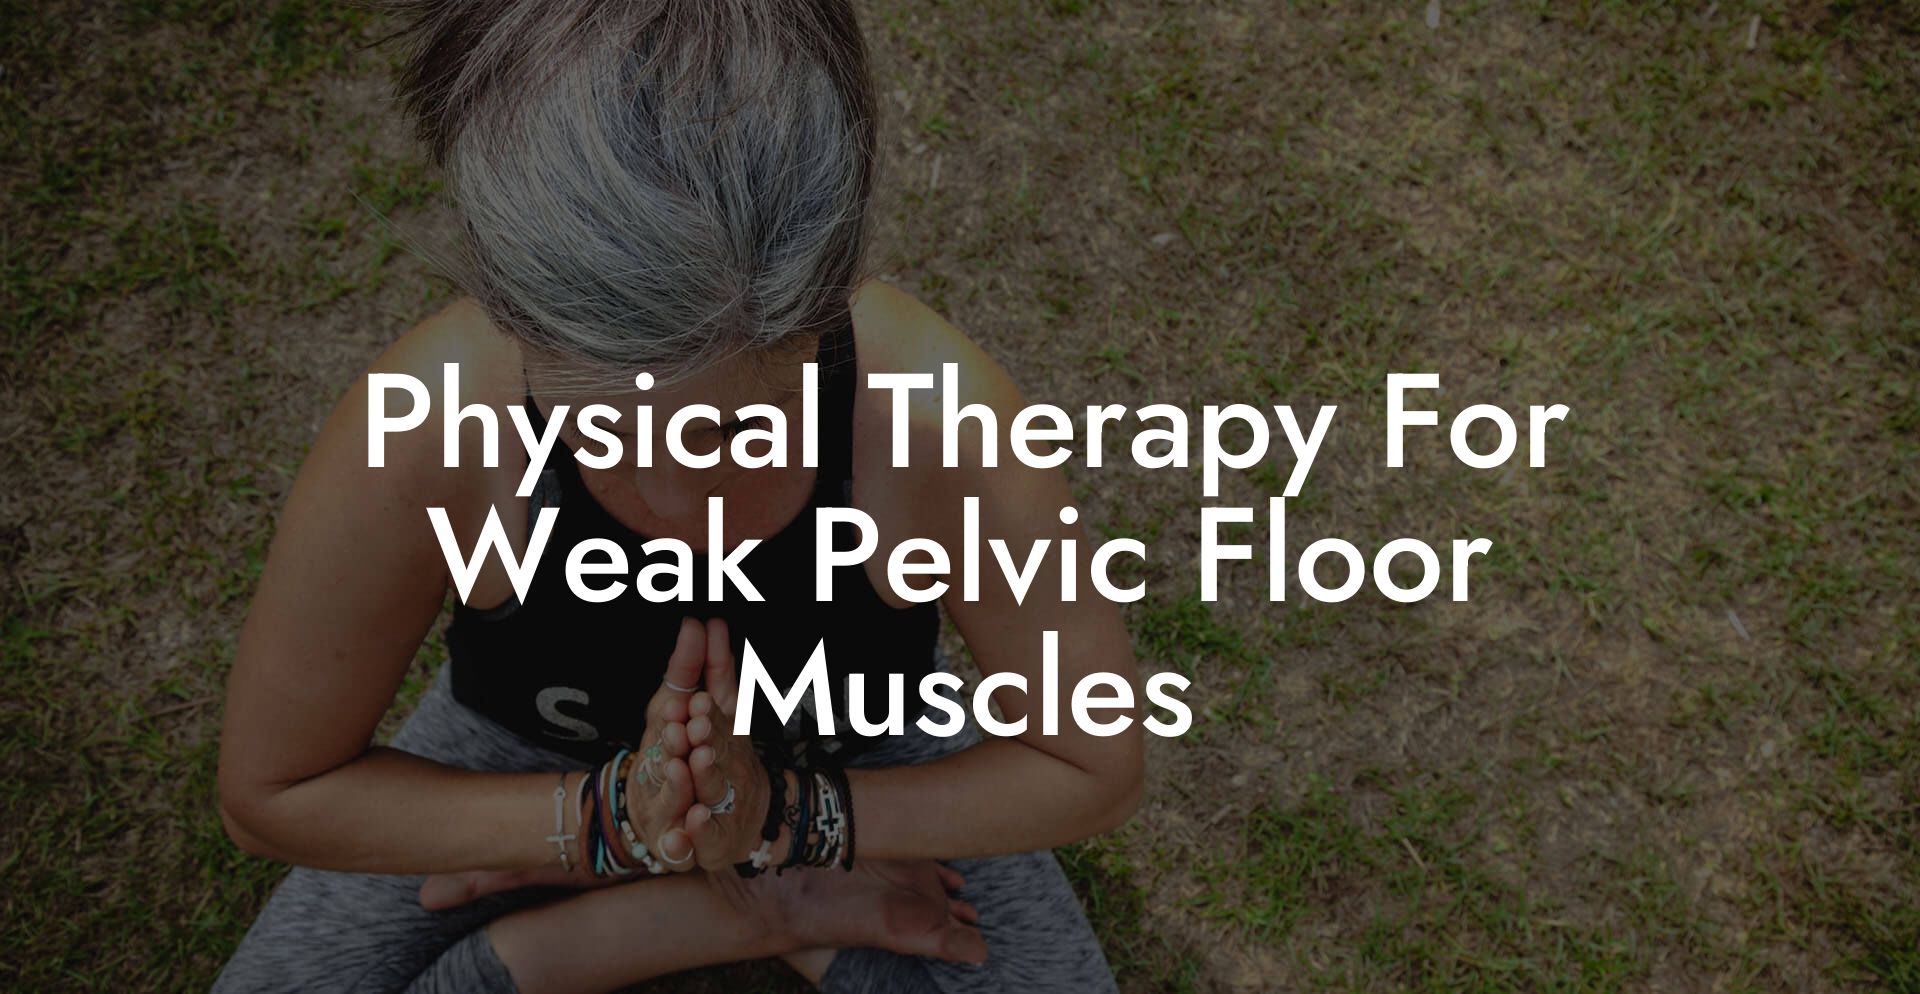 Physical Therapy For Weak Pelvic Floor Muscles